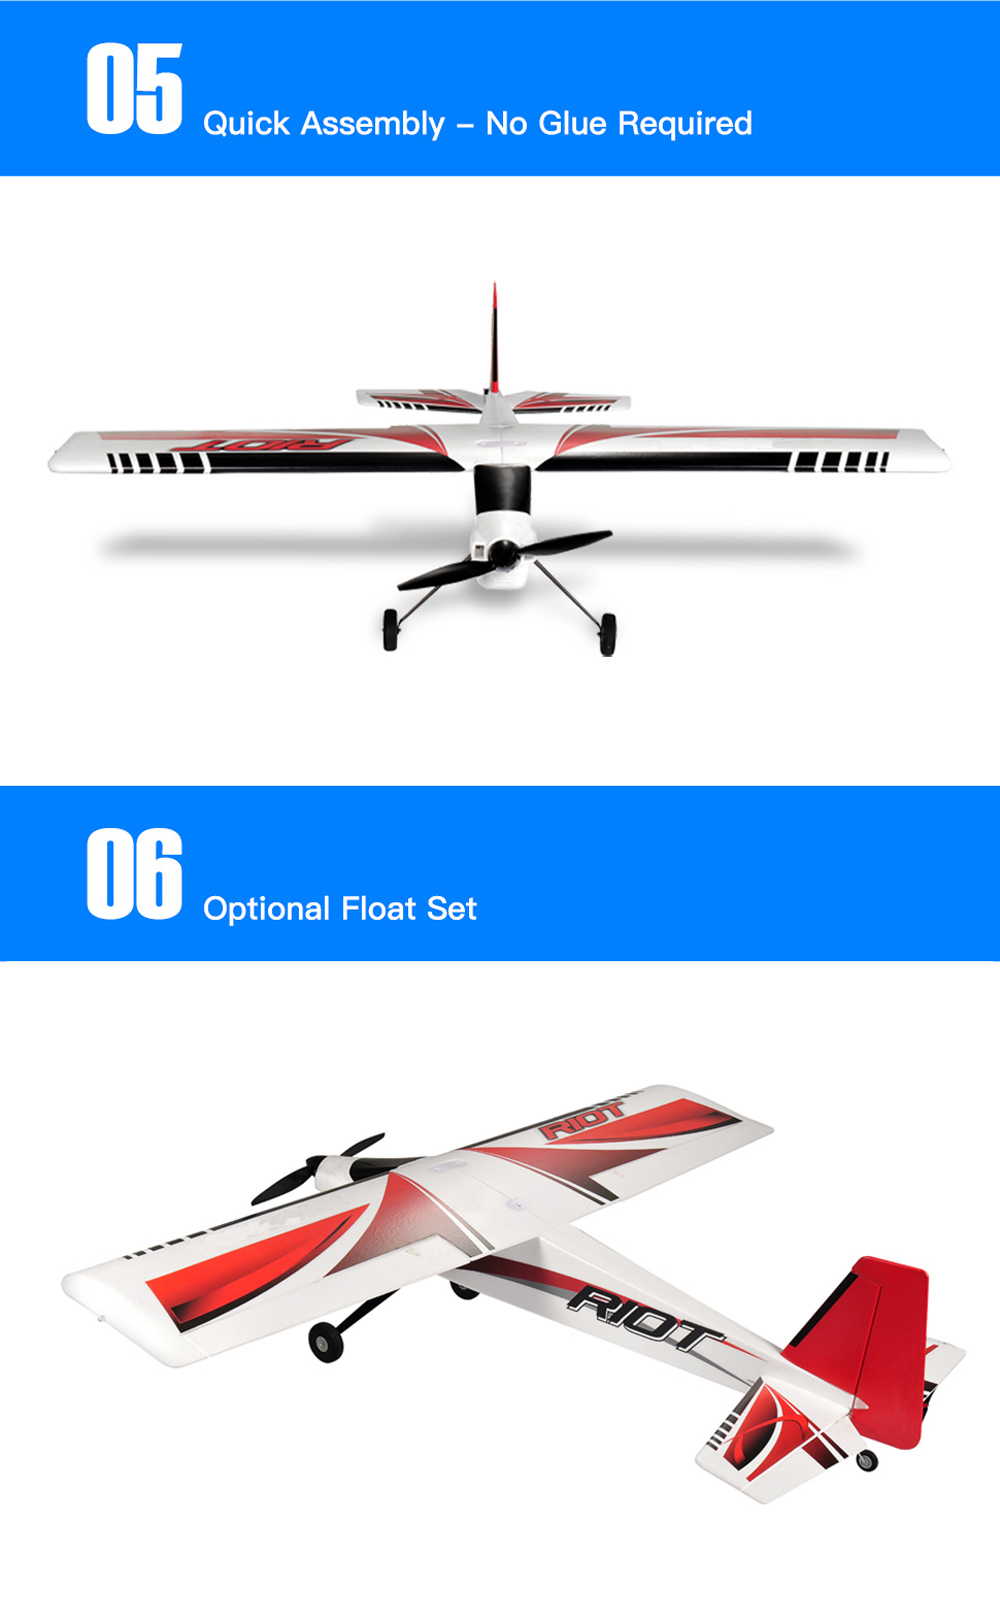 TOPRC-Hobby-RIOT-1400mm-Wingspan-EPO-Practice-Sport-Plane-RC-Airplane-PNP-for-Trainer-Beginners-1736767-7